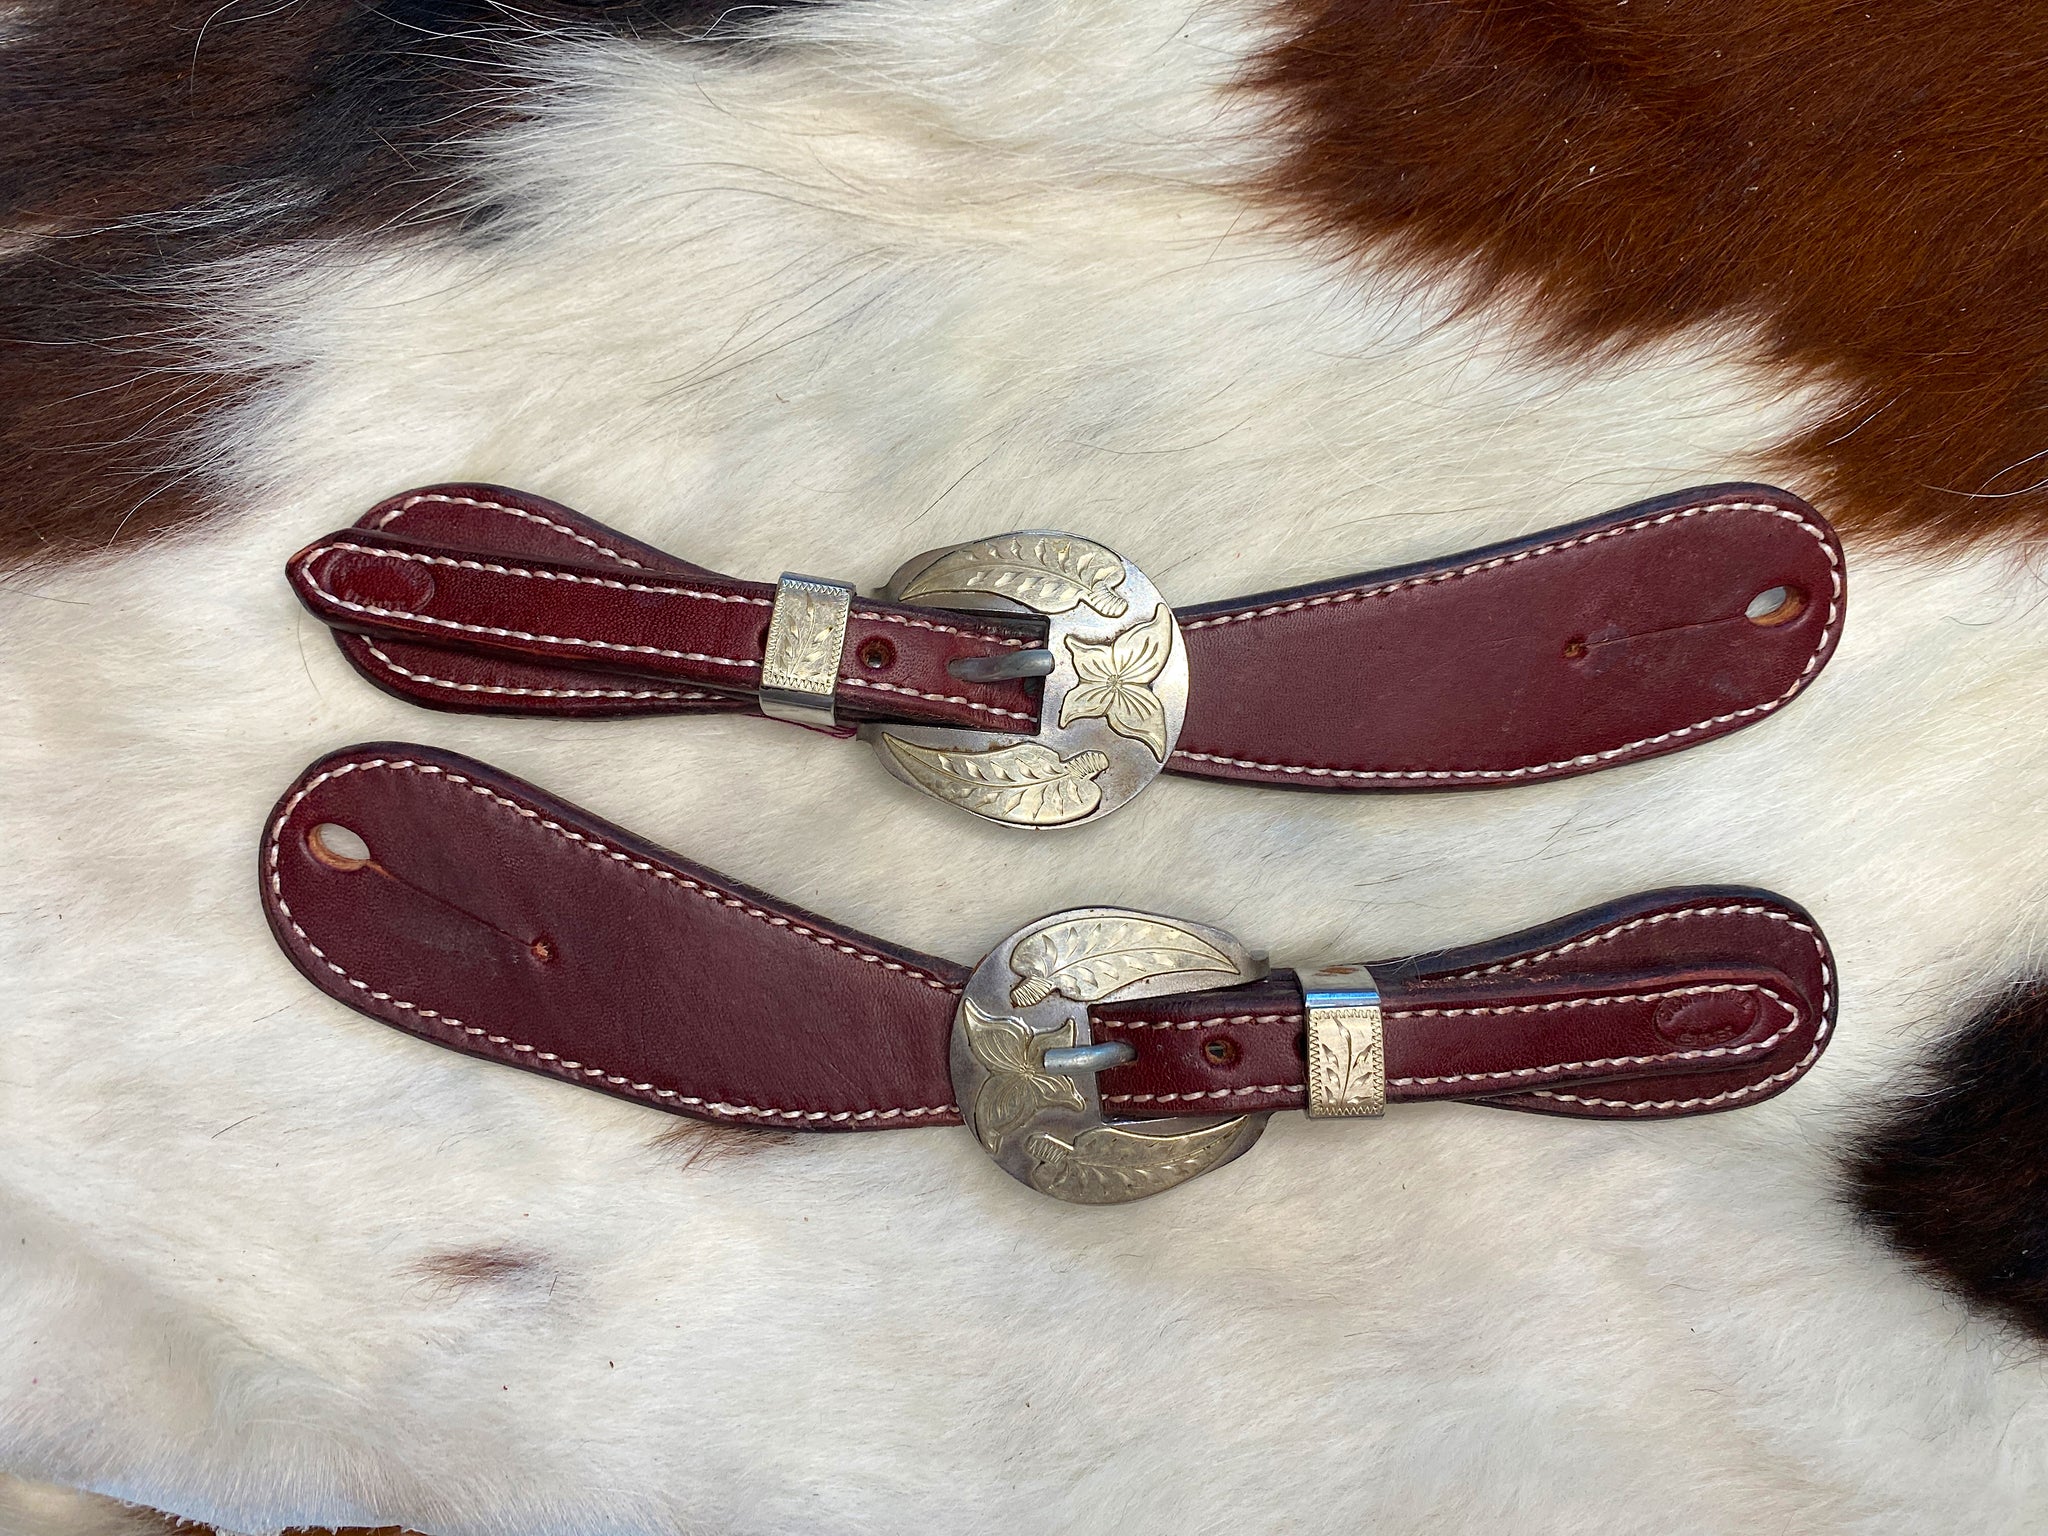 English Bridle Spur Leathers - Dollar Buckles